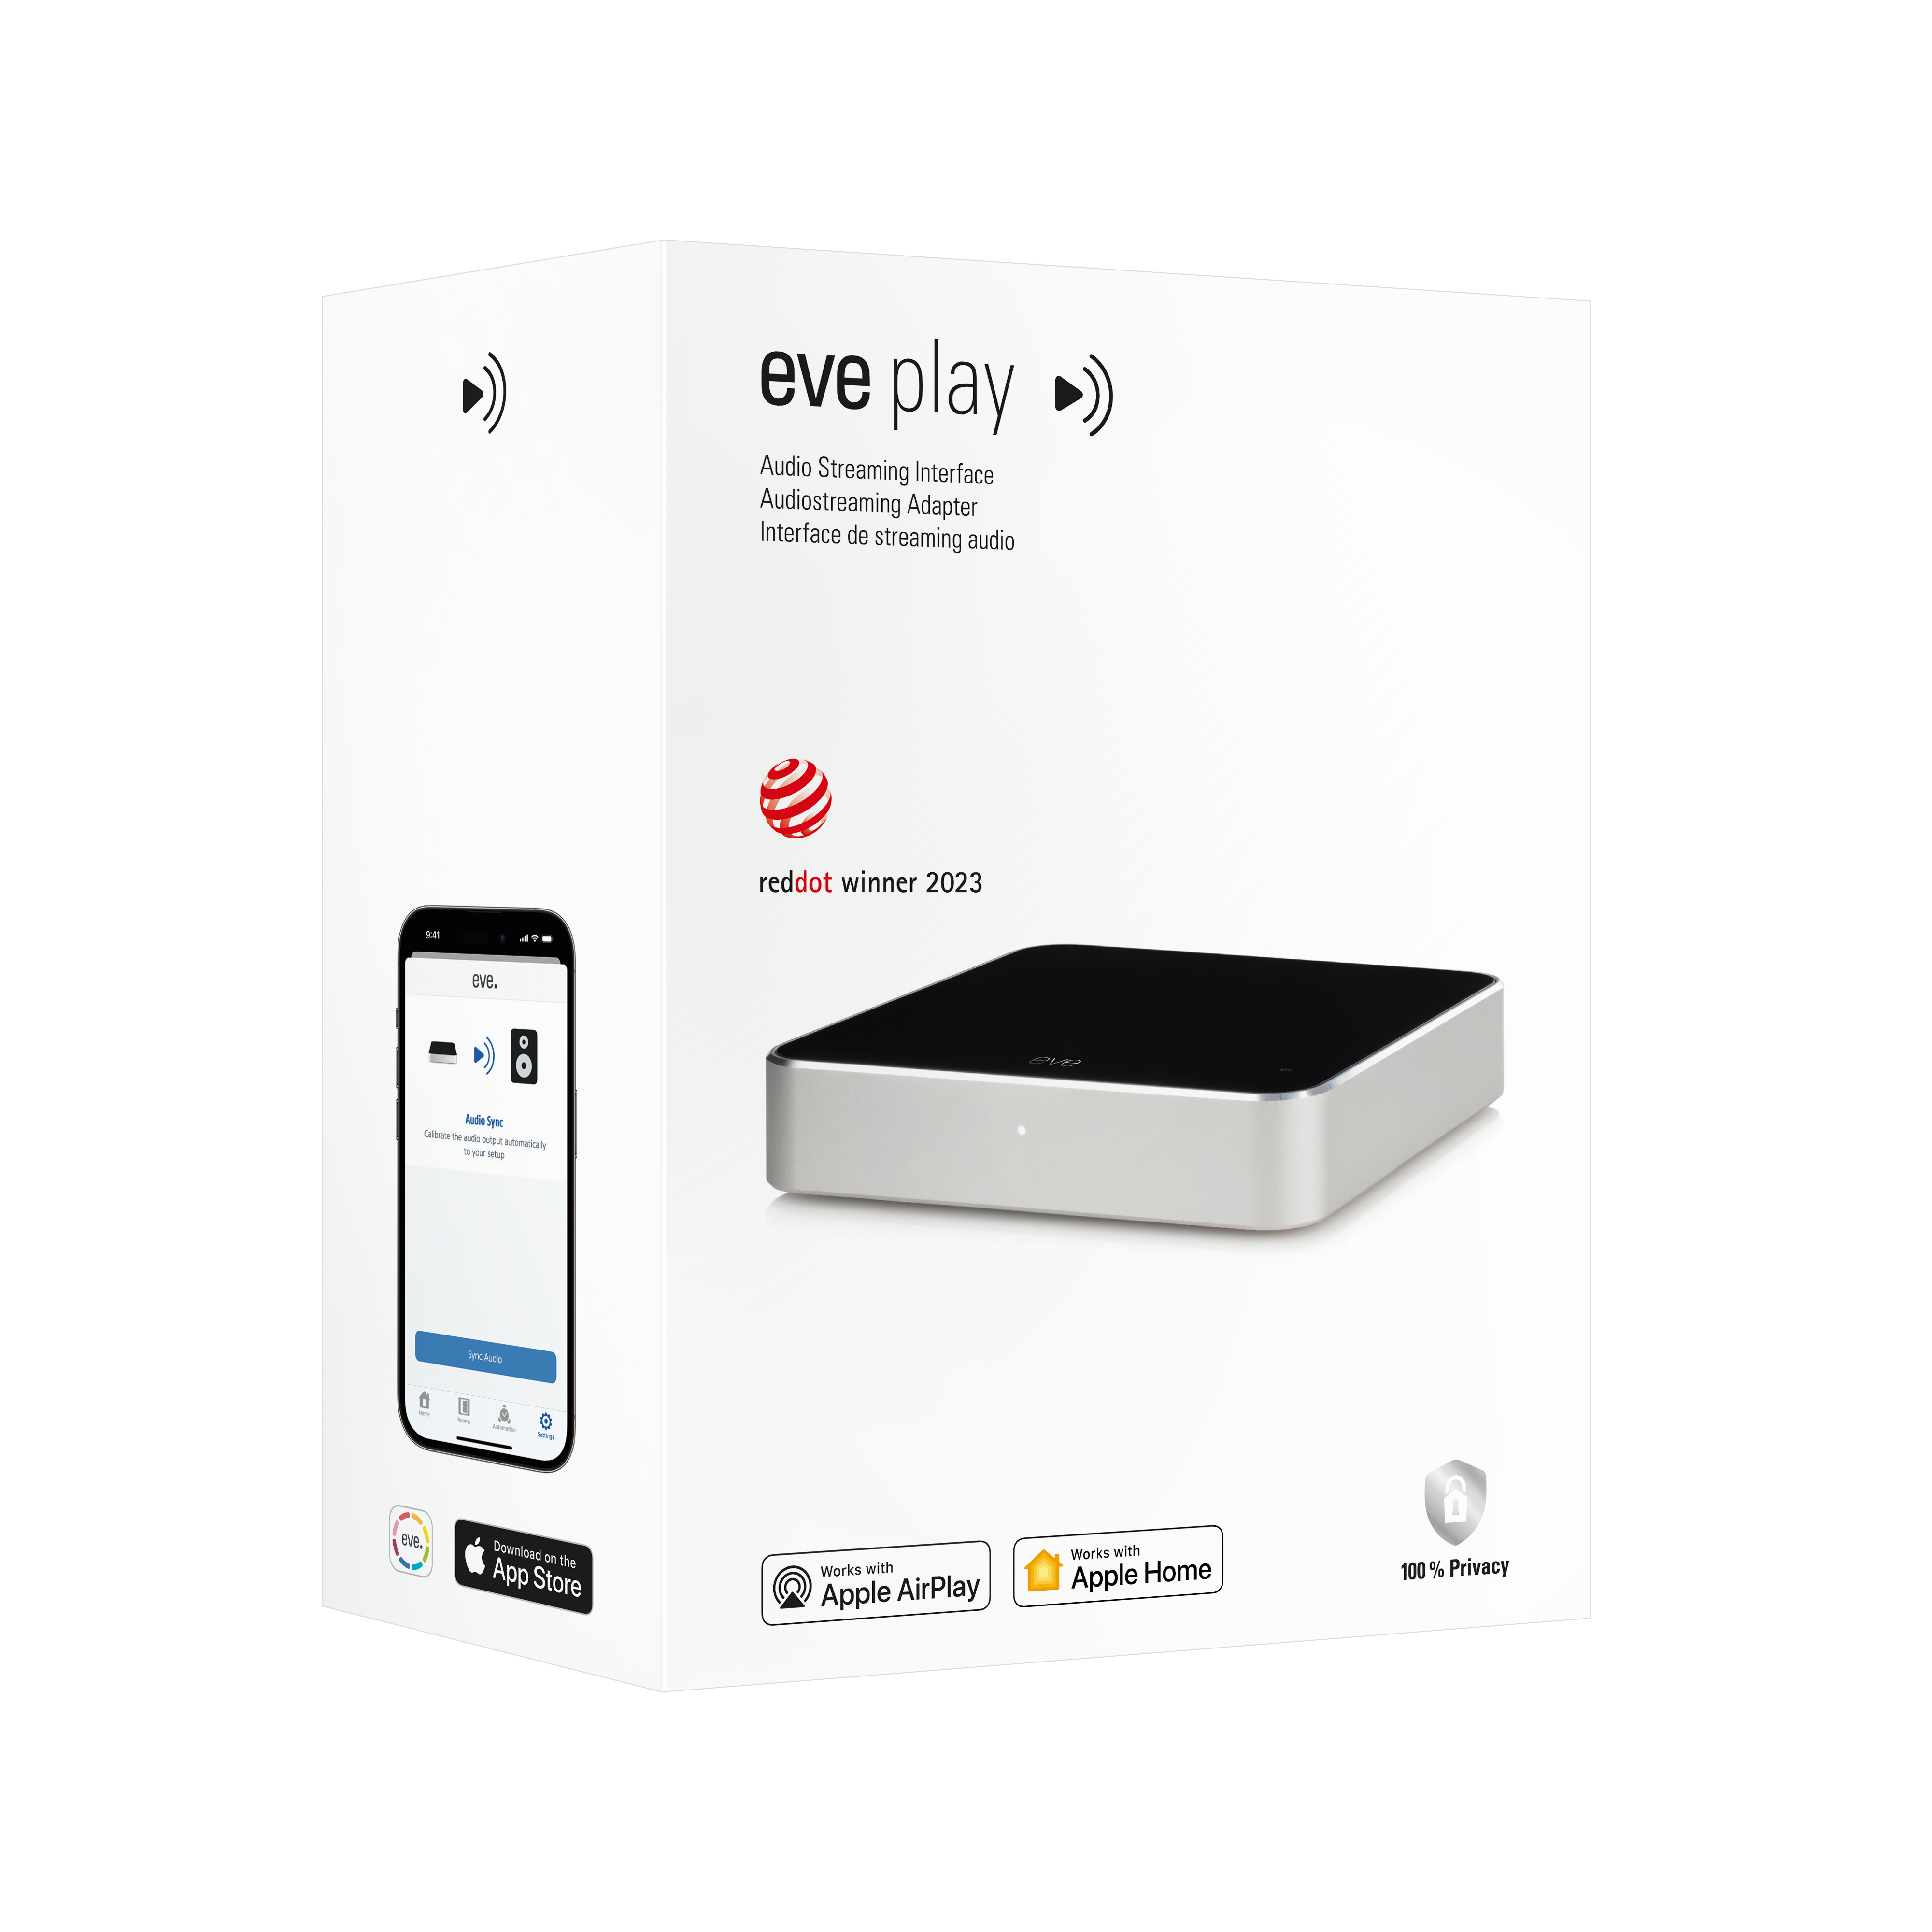 Eve Play - Audiostreaming Adapter für AirPlay + Eve Energy Smart Plug  (Matter) ++ Cyberport